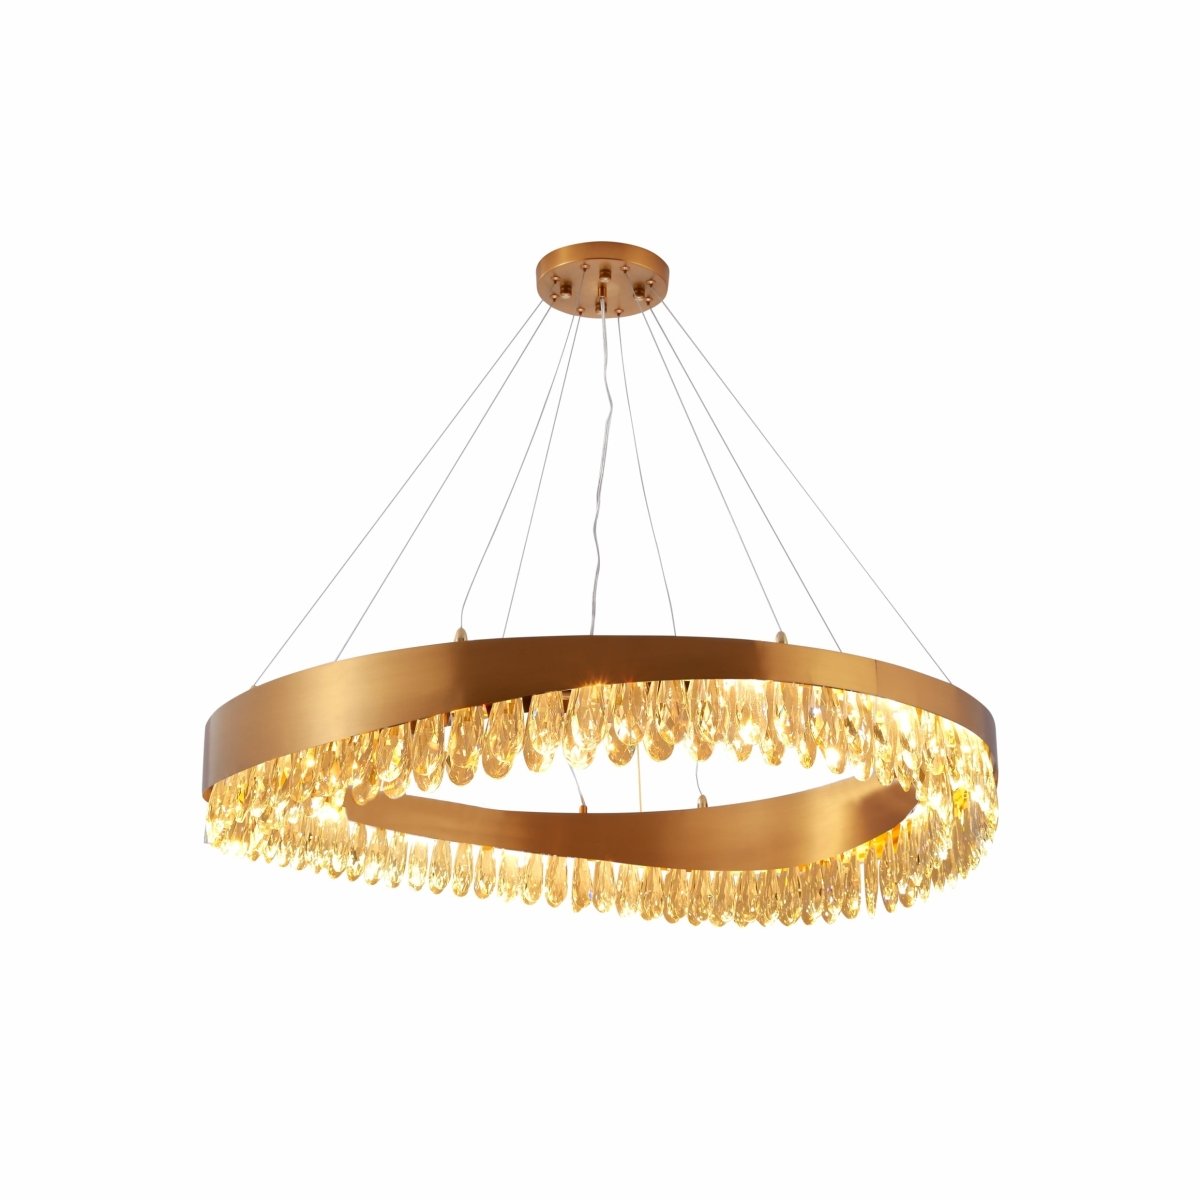 Main image of Faceted Long Pear Crystal Gold Metal Chandelier D1000 with 16xG9 Fitting | TEKLED 156-19572